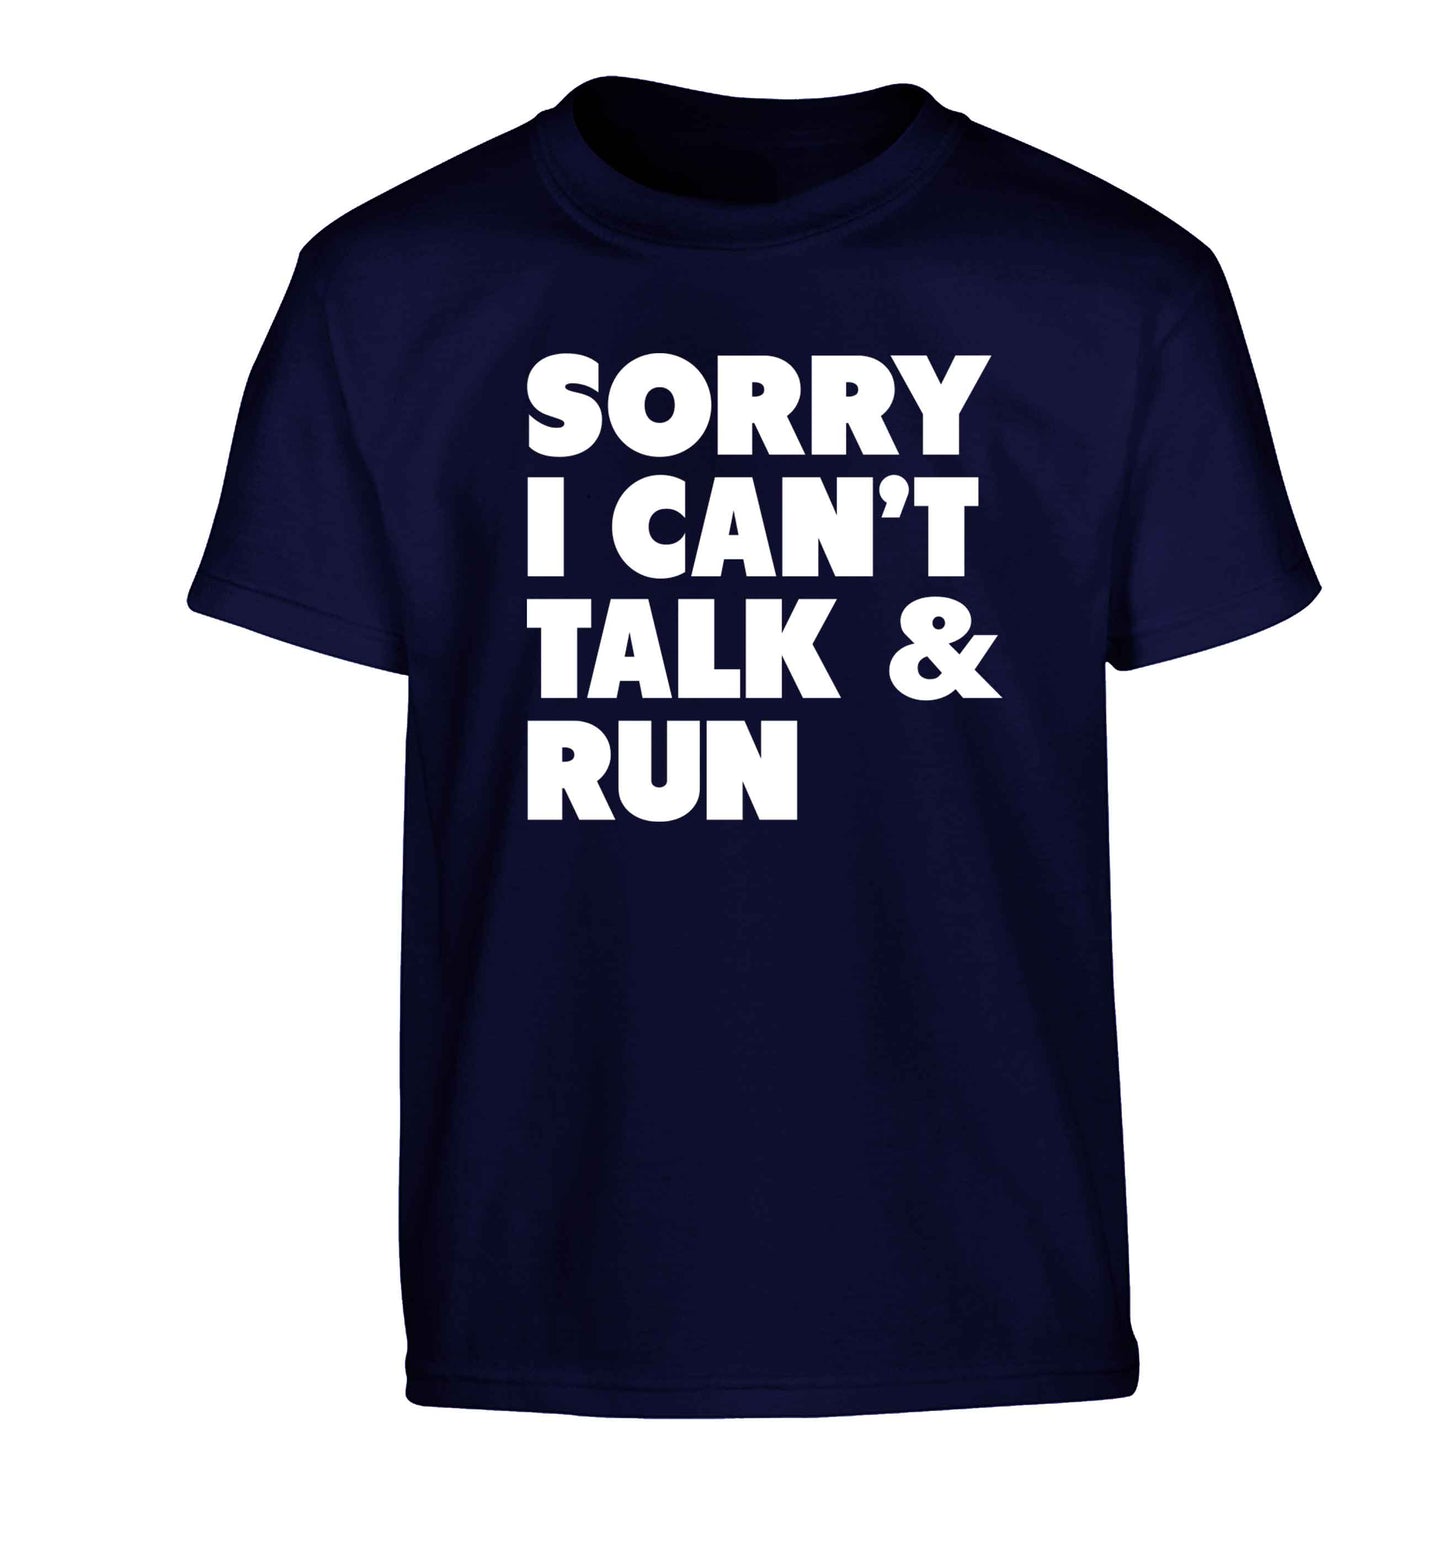 Sorry I can't talk and run Children's navy Tshirt 12-13 Years